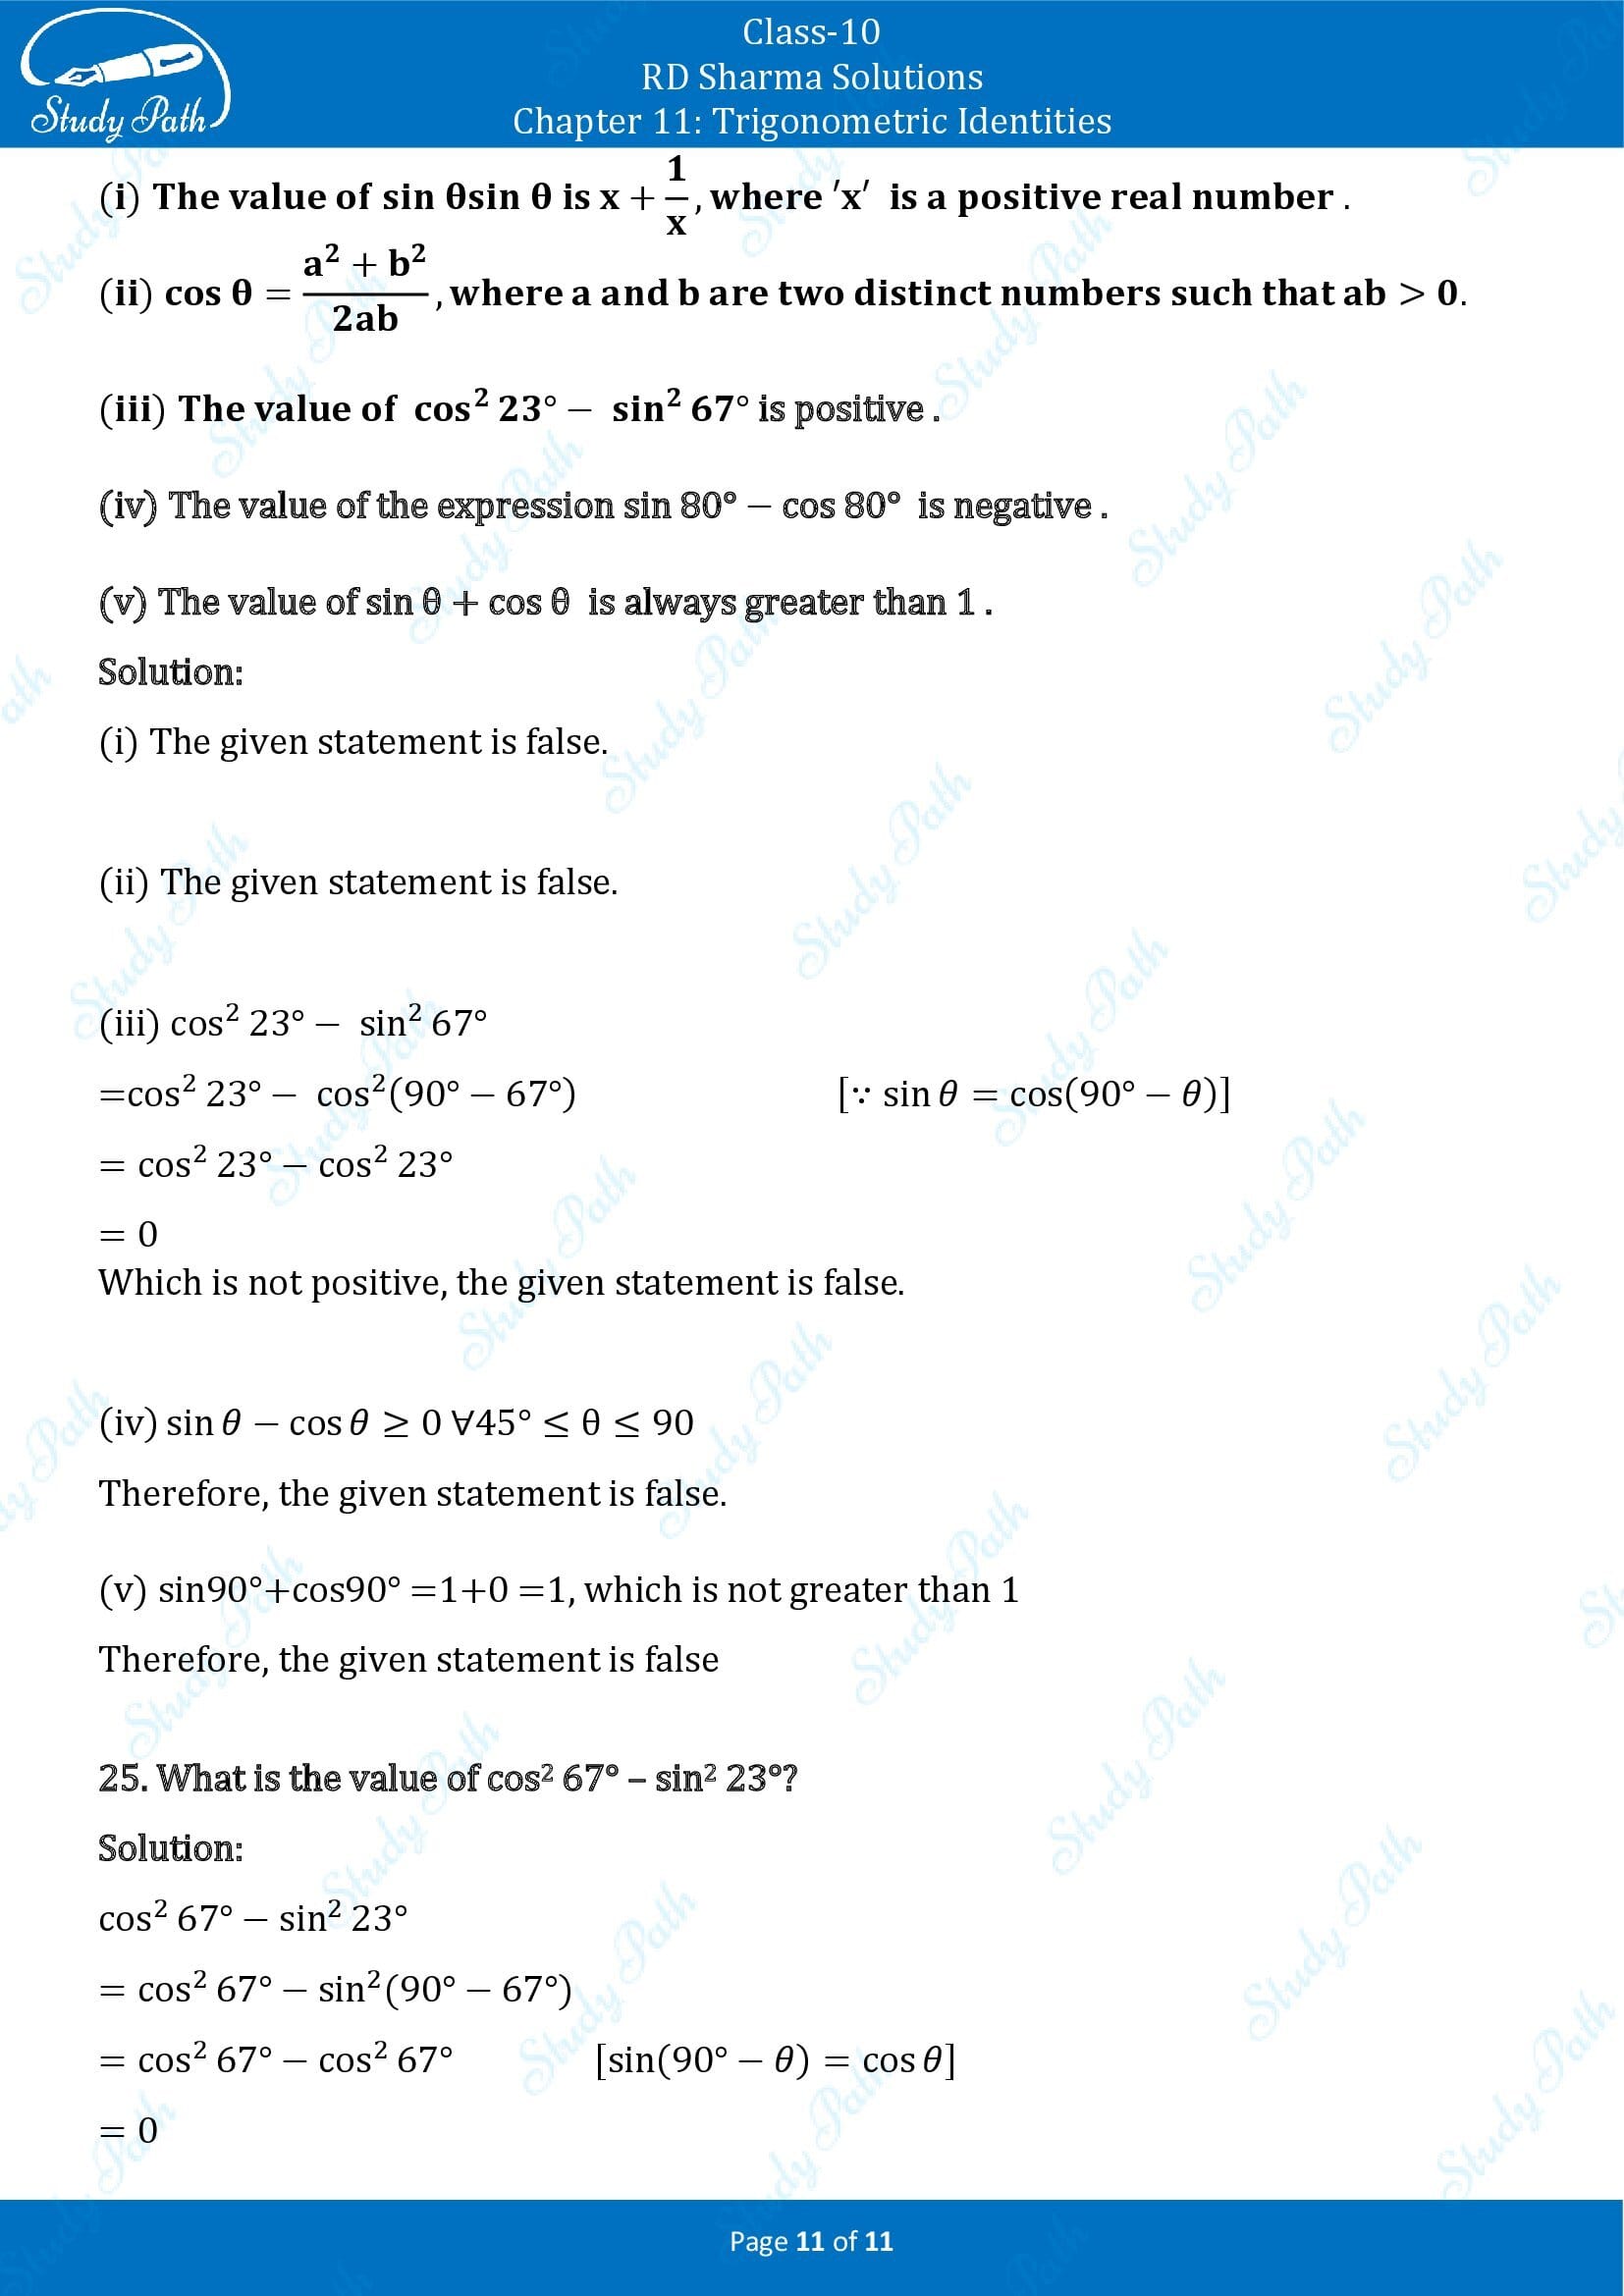 RD Sharma Solutions Class 10 Chapter 11 Trigonometric Identities Very Short Answer Type Questions VSAQs 00011